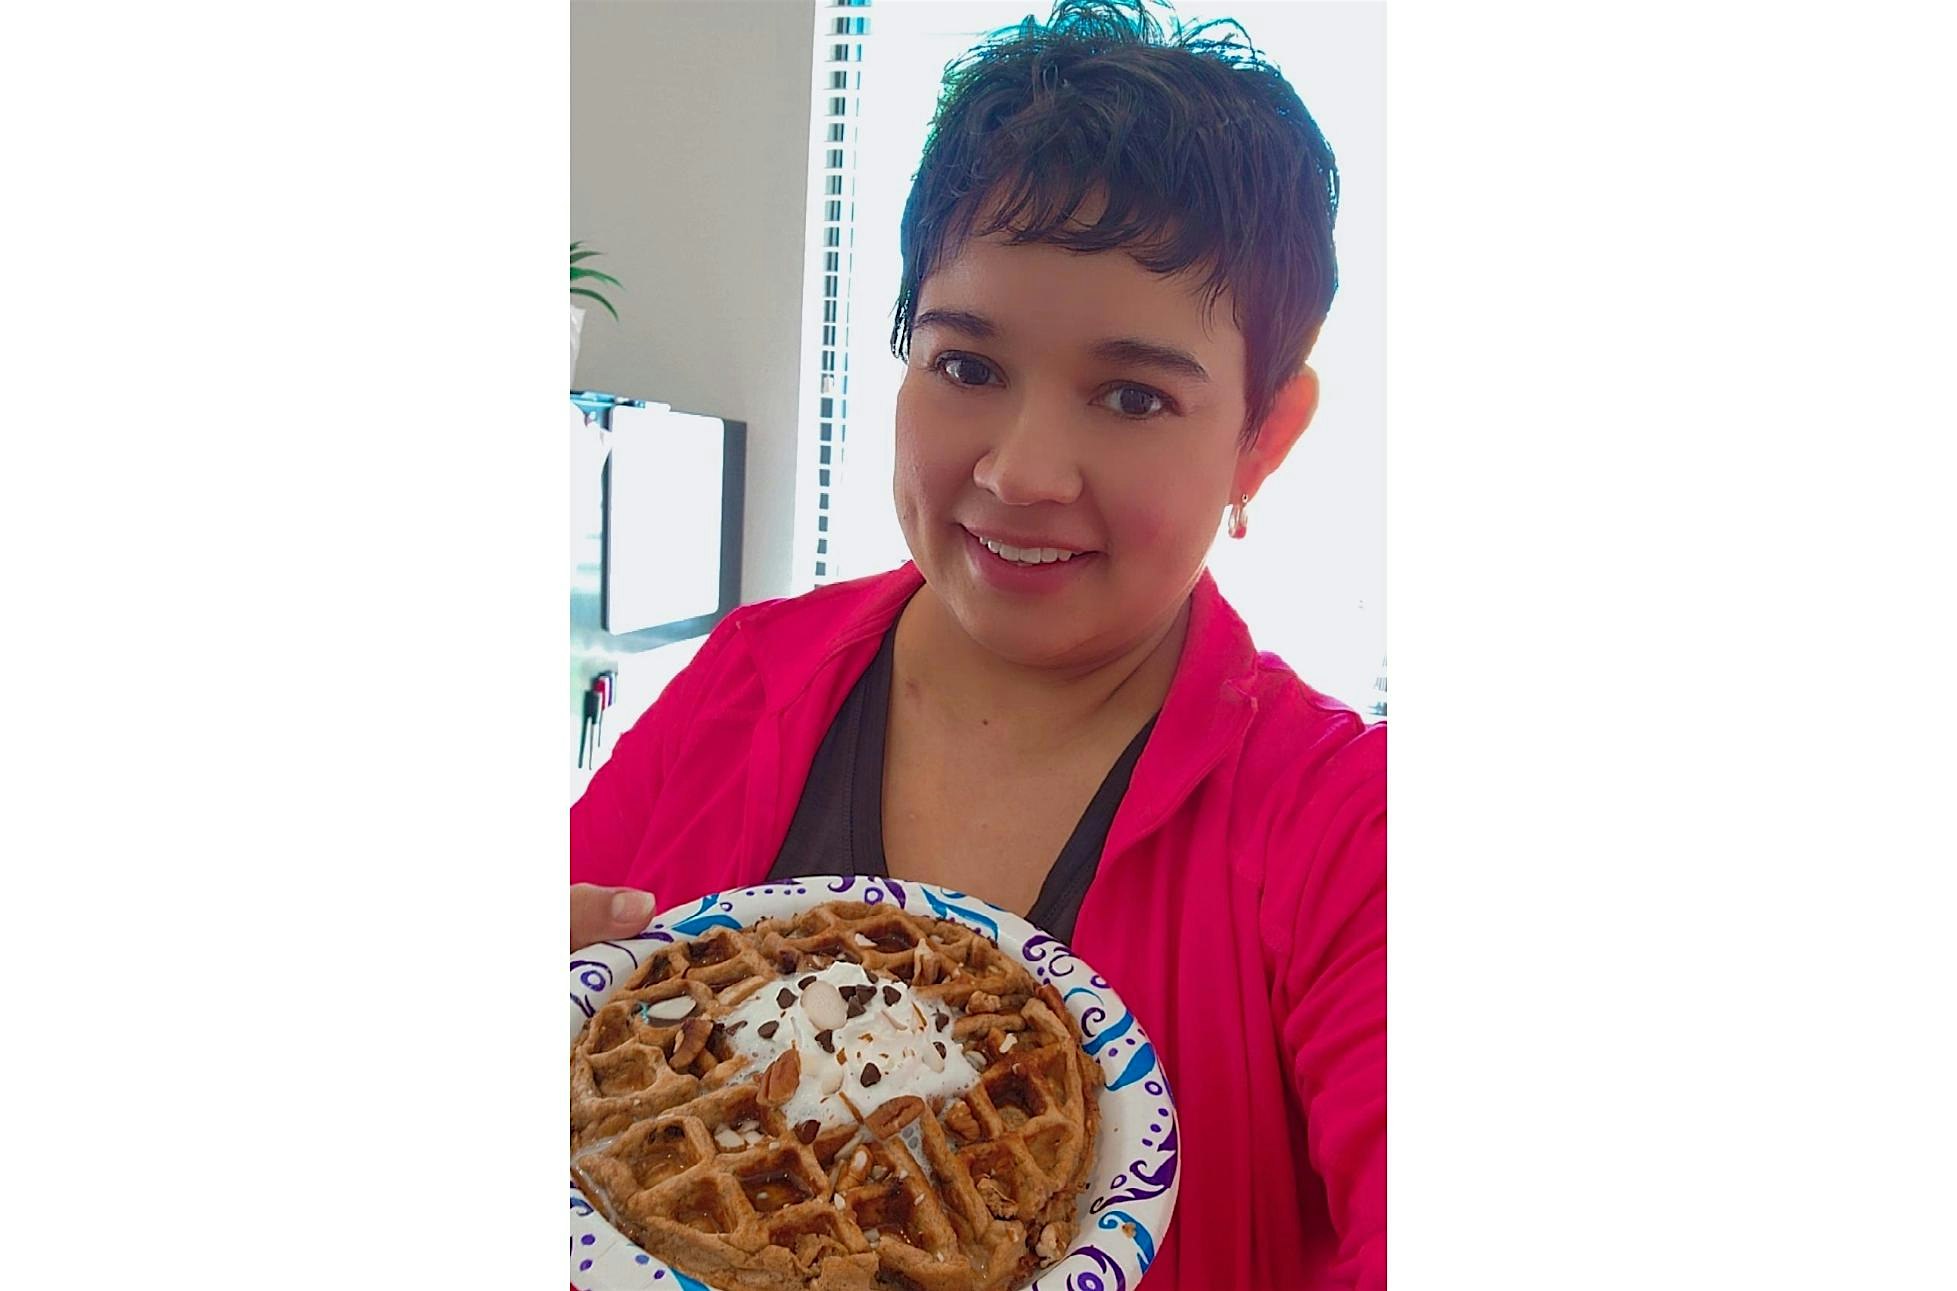 Waffles with Benefits-Arlenes Cancer support fundraiser